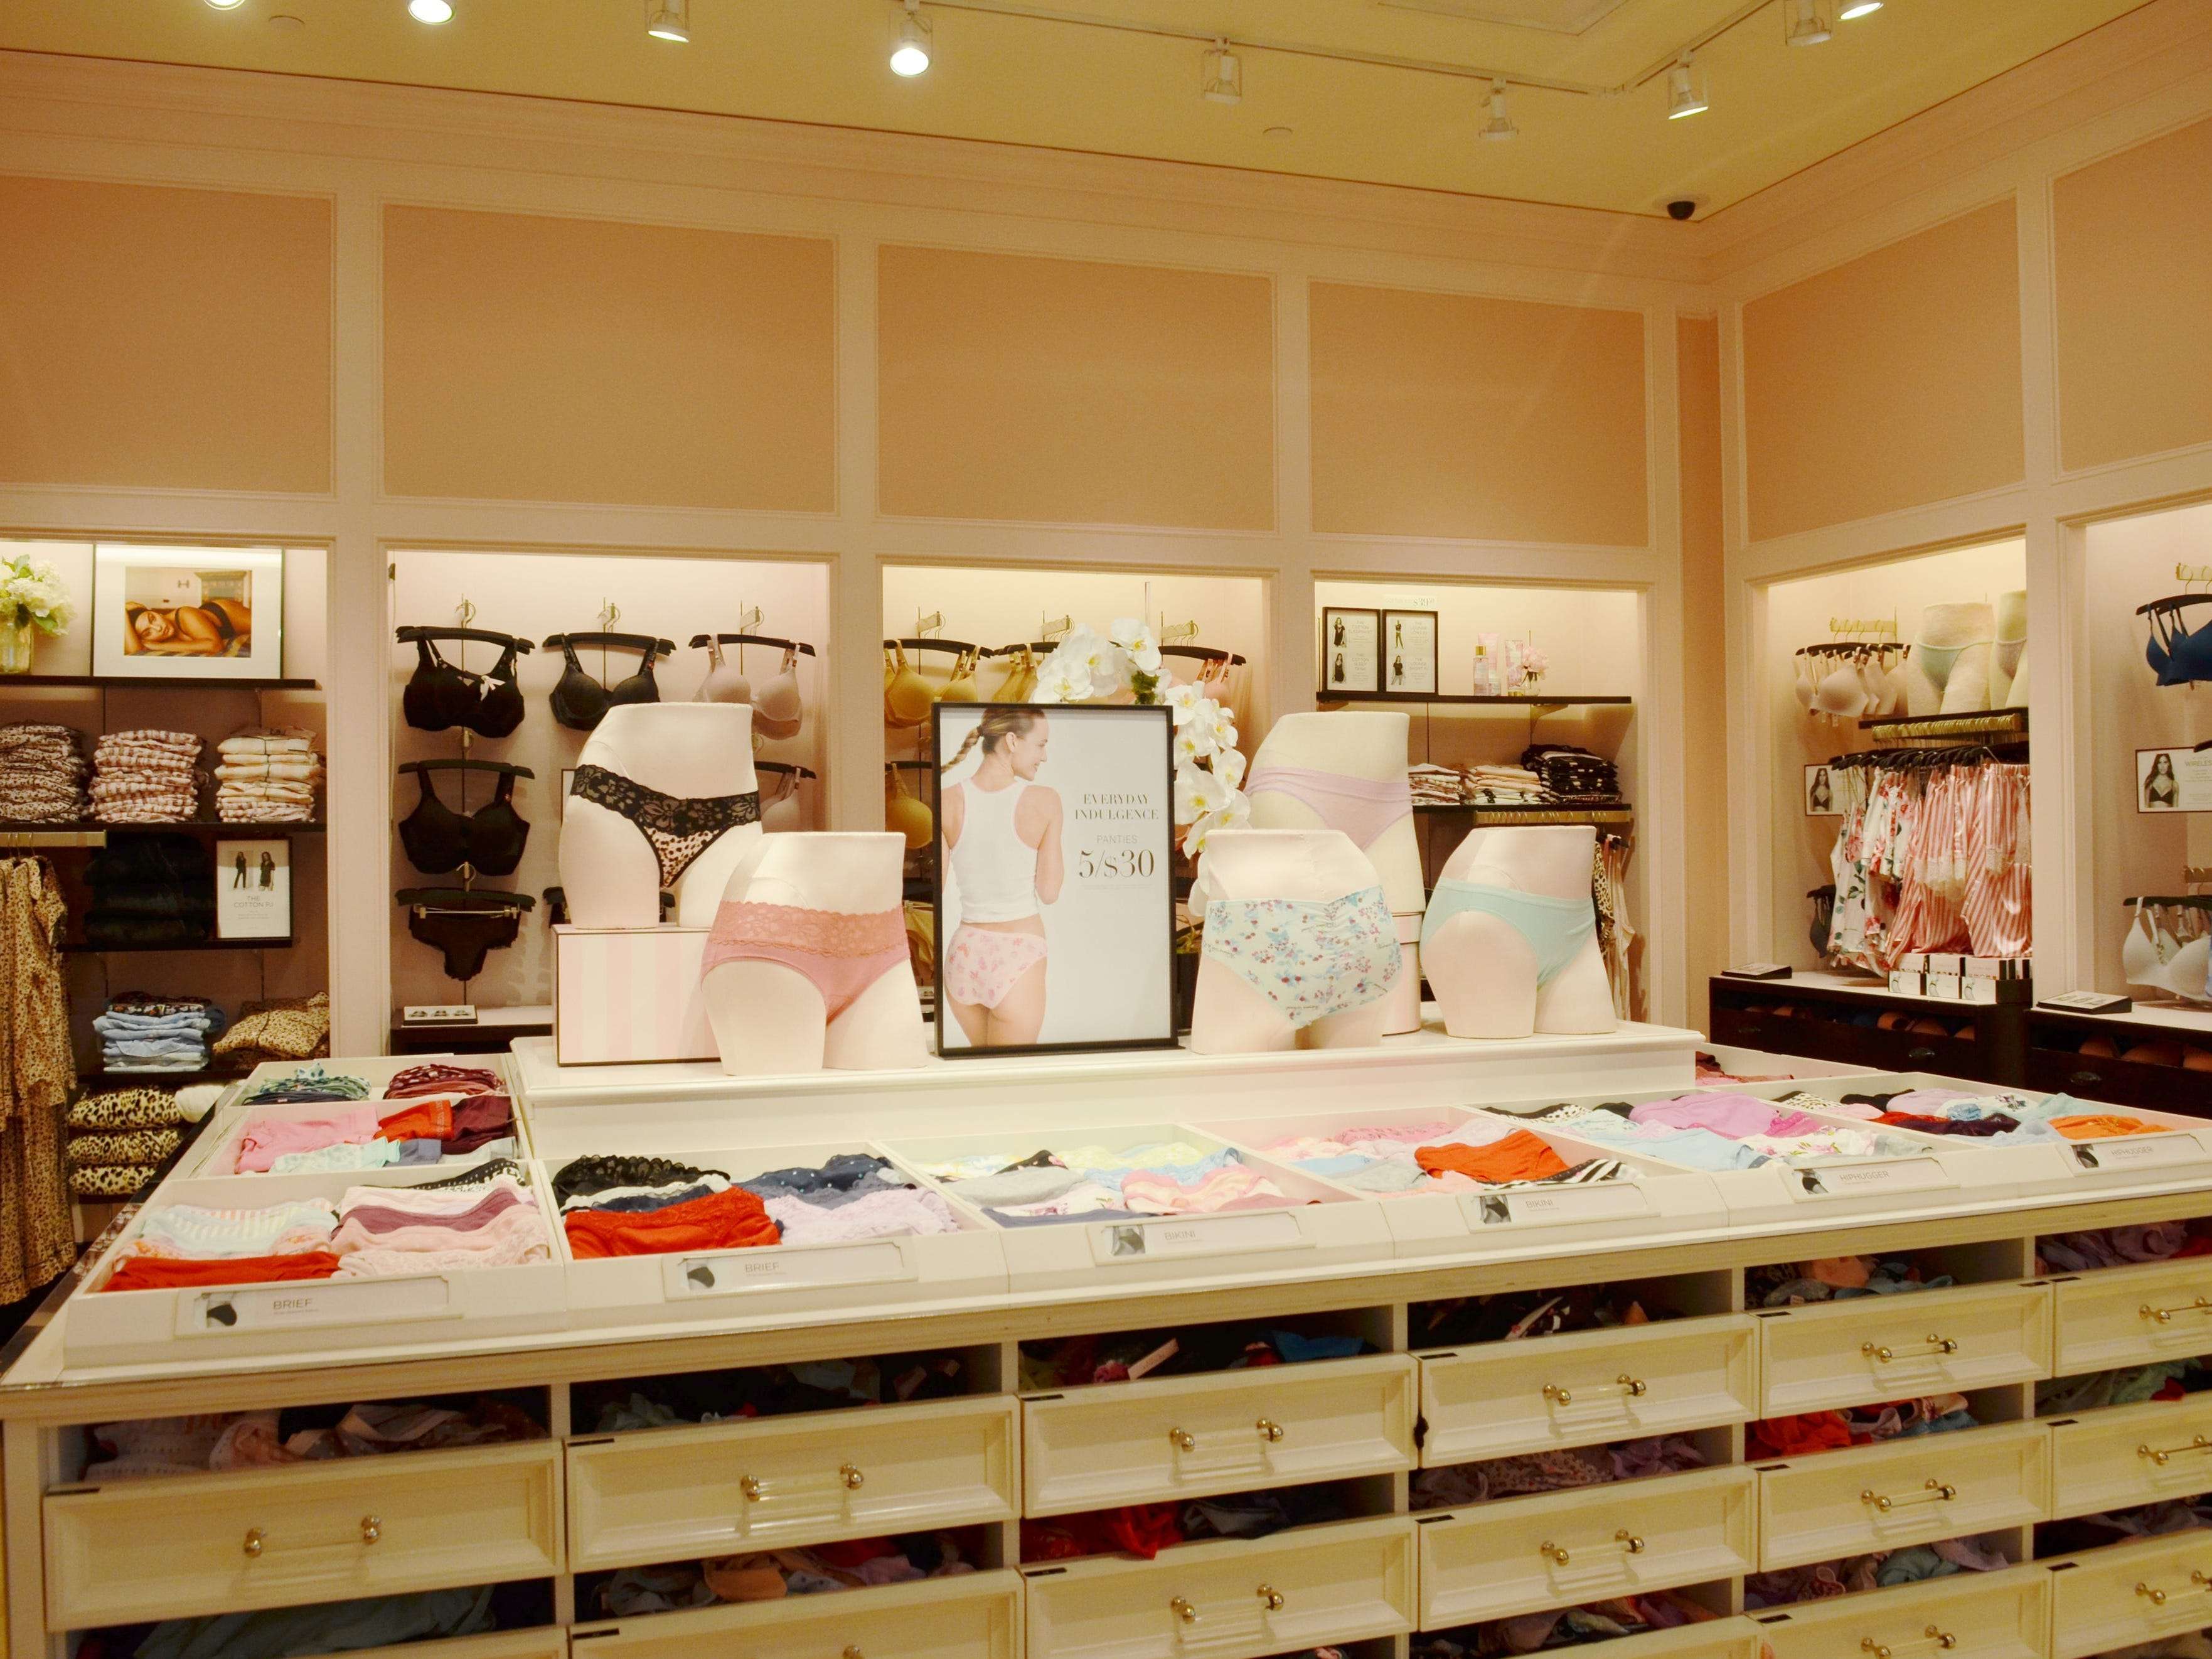 See Inside Victoria's Secret's Revamped Store As It Ditches Angels